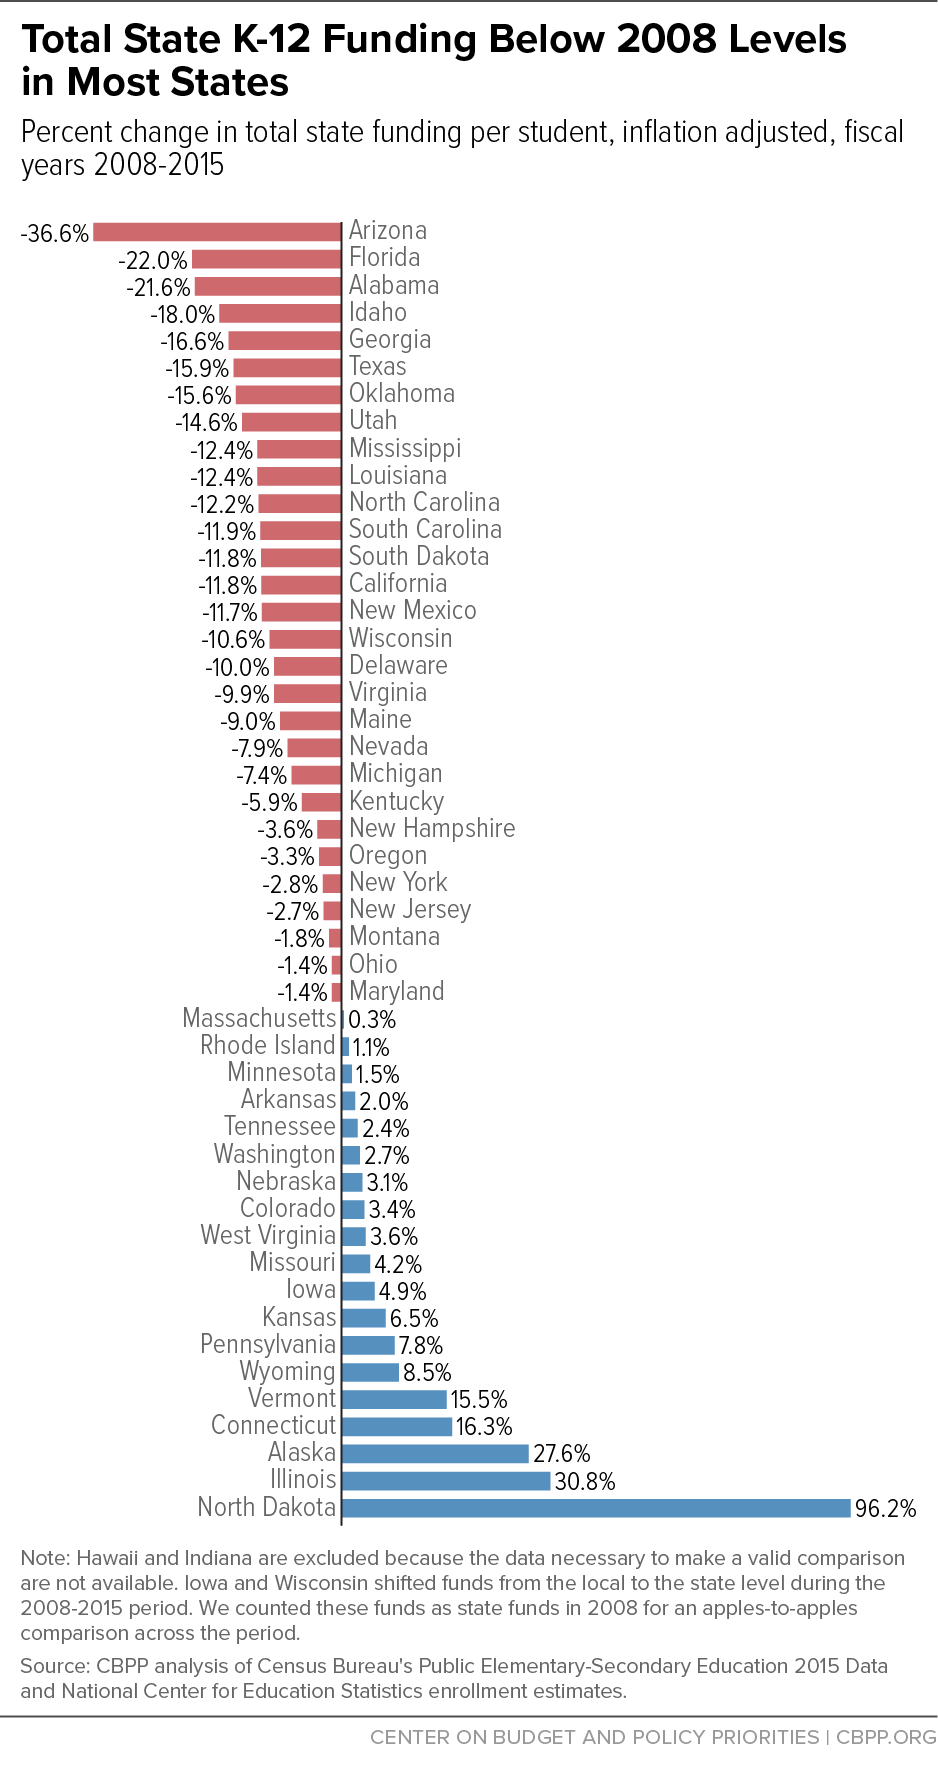 state-funding-per-student-fy-2008-2015_ia_wi_450.png